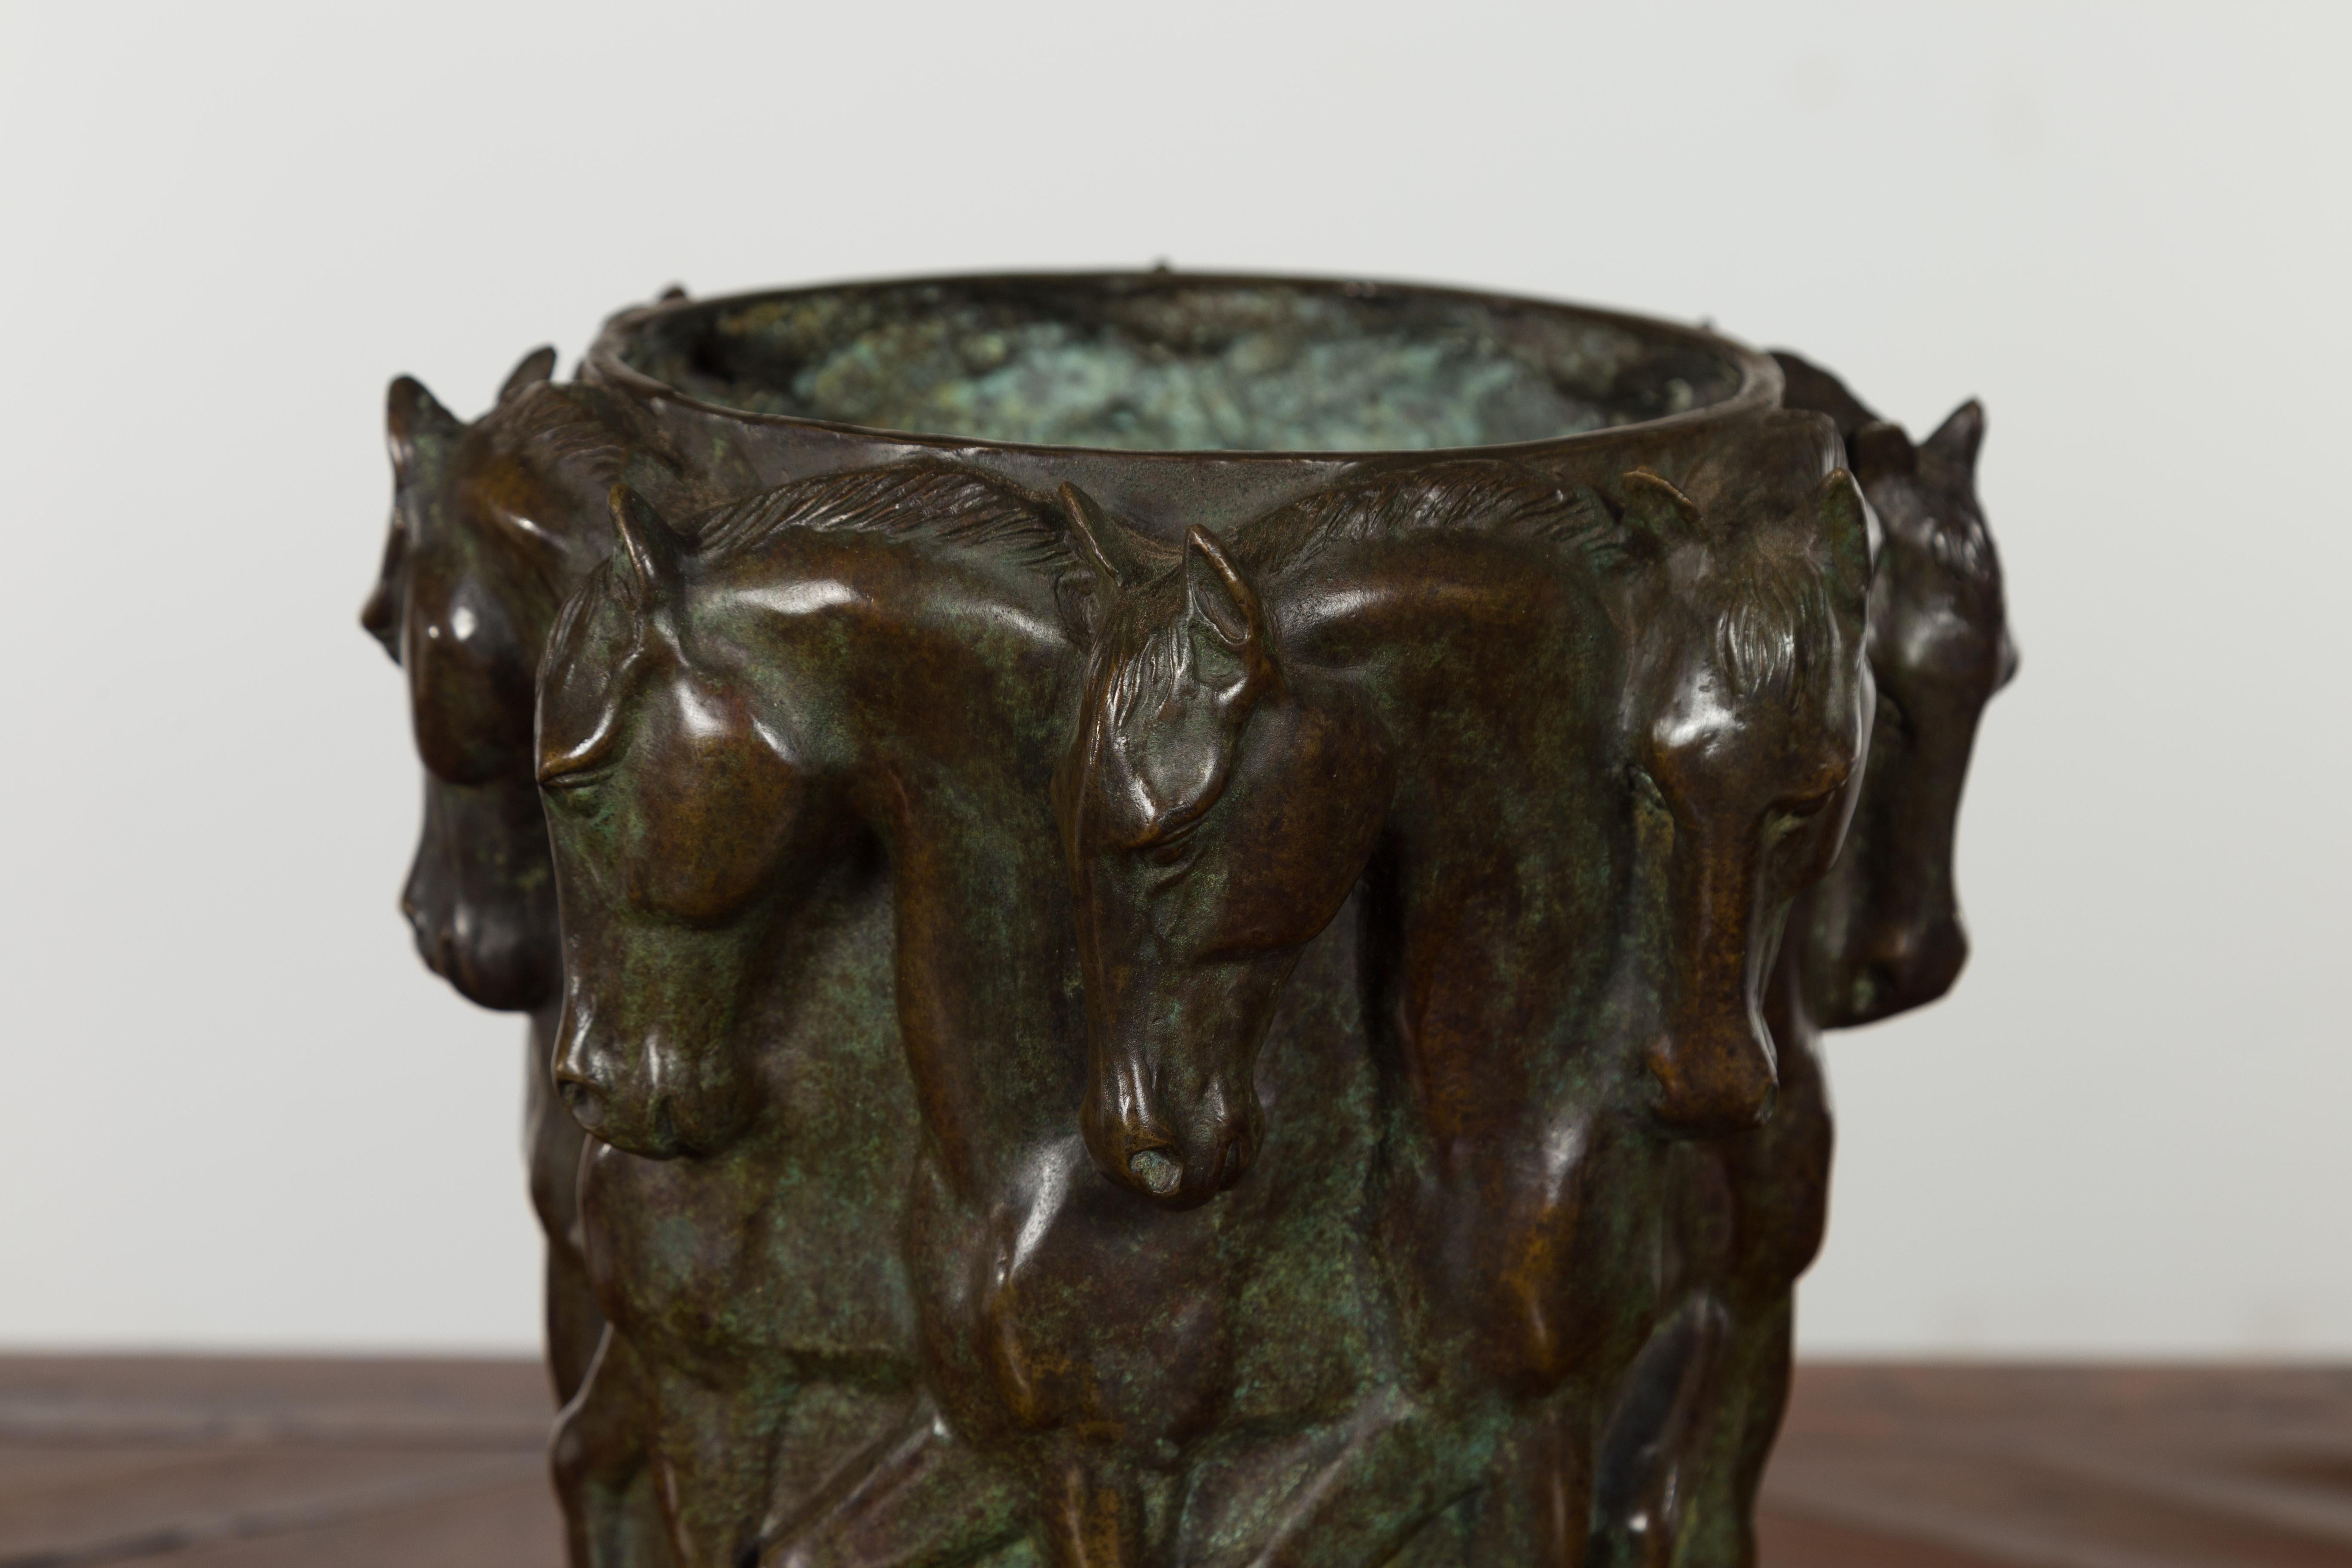 20th Century 1920s Patinated Bronze Vase with Frieze of Passing Horses Cast in High Relief